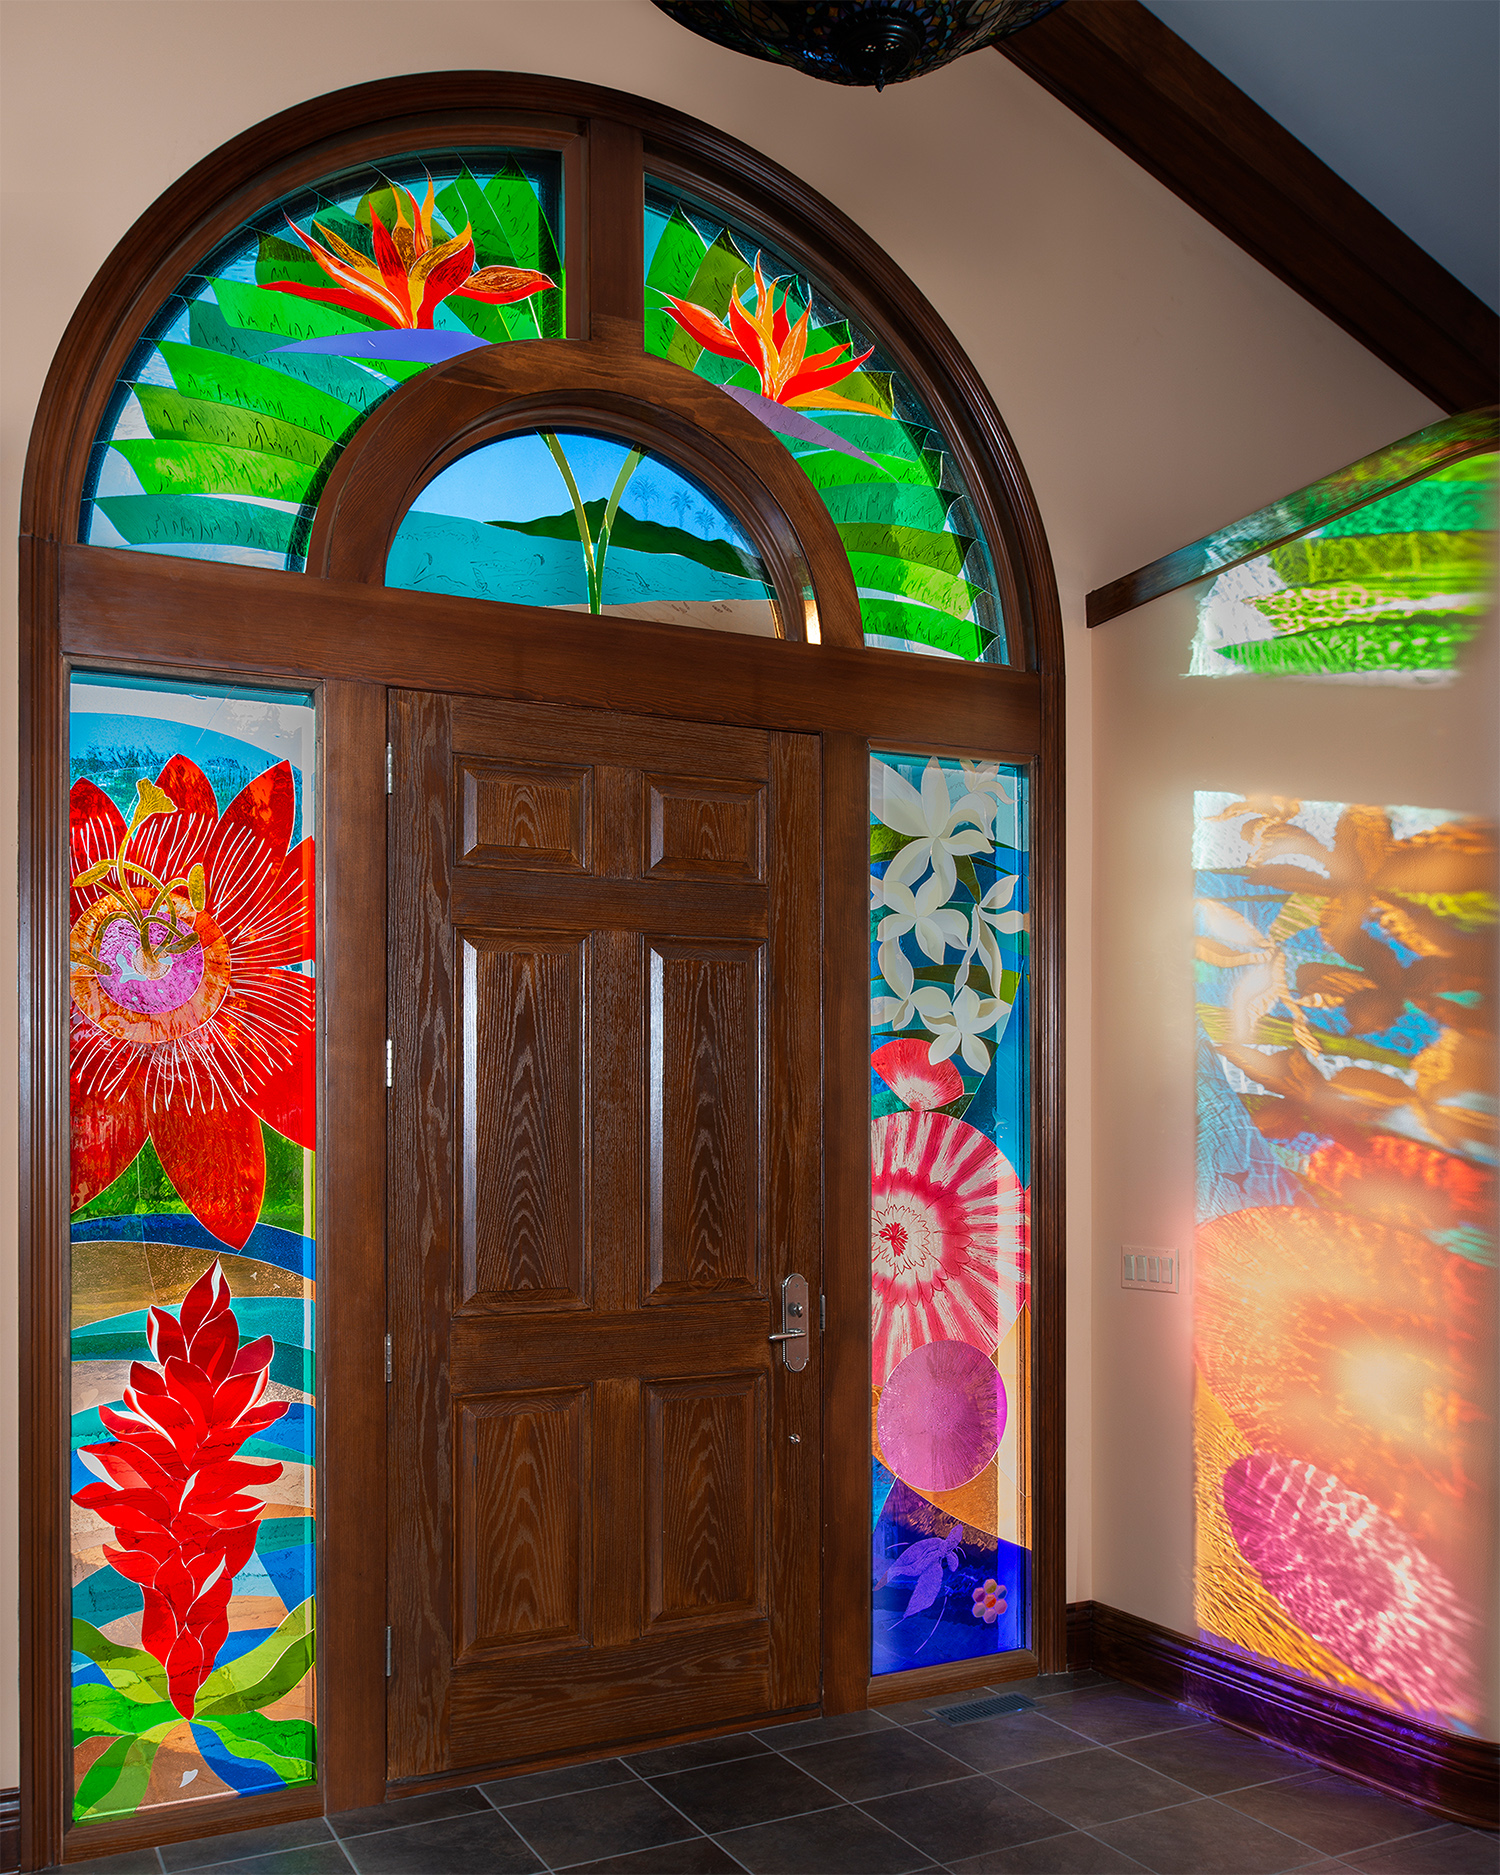 “Paradise,” an Entry Full of Life and Color Welcomes You